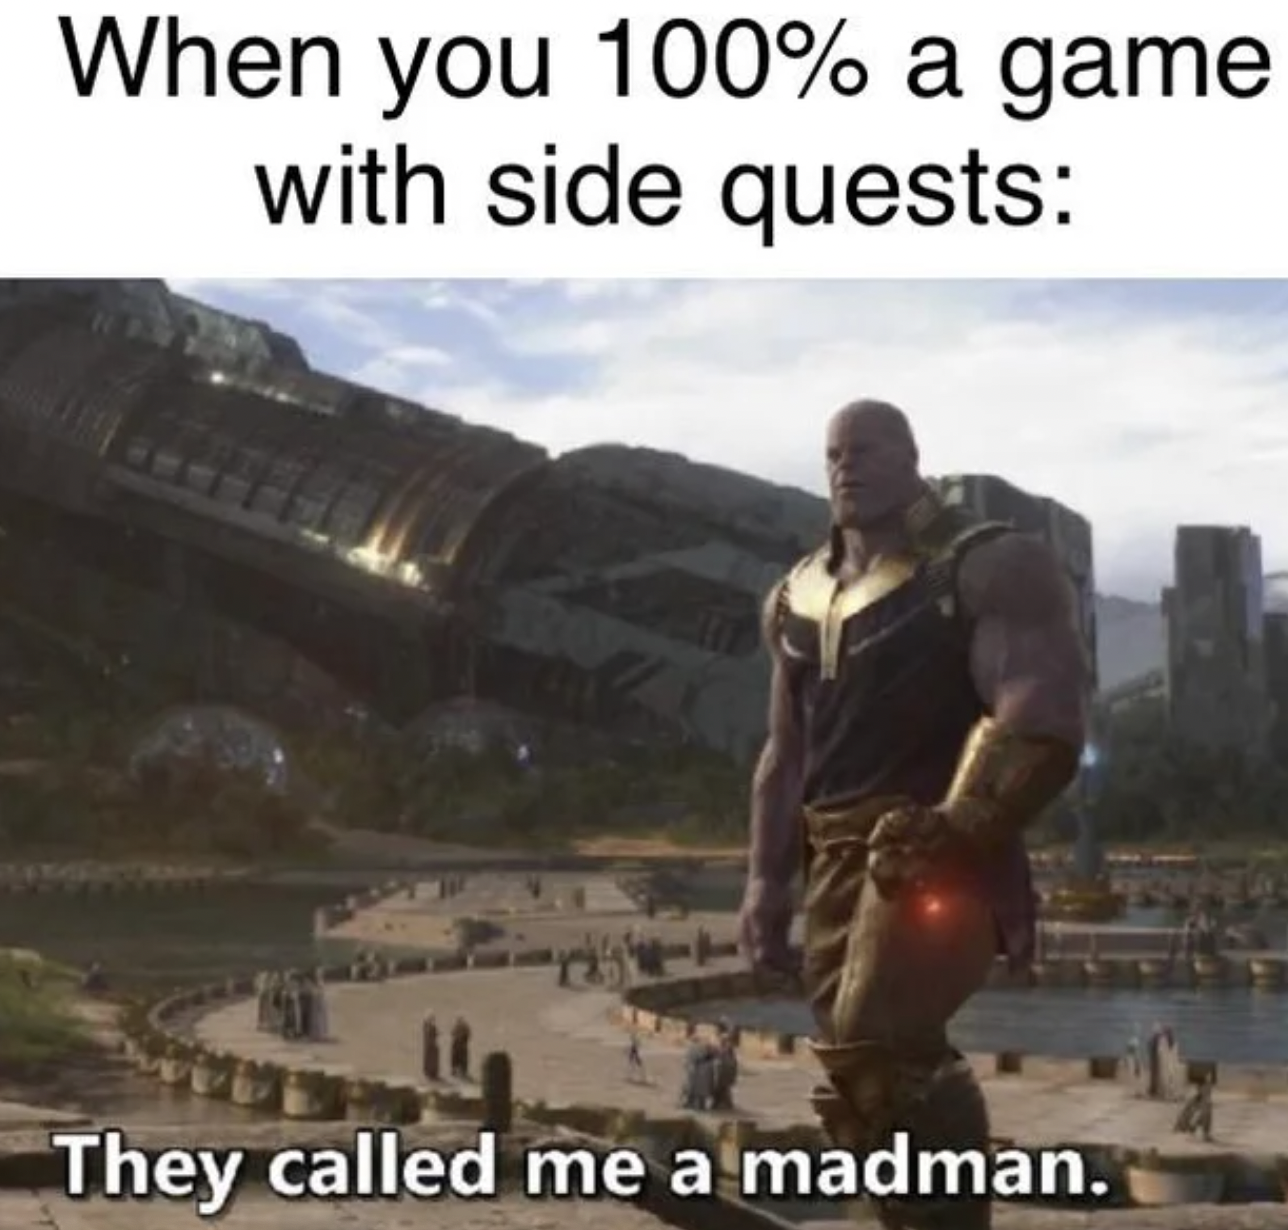 Gaming memes - they called me ahmad mann - When you 100% a game with side quests They called me a madman.